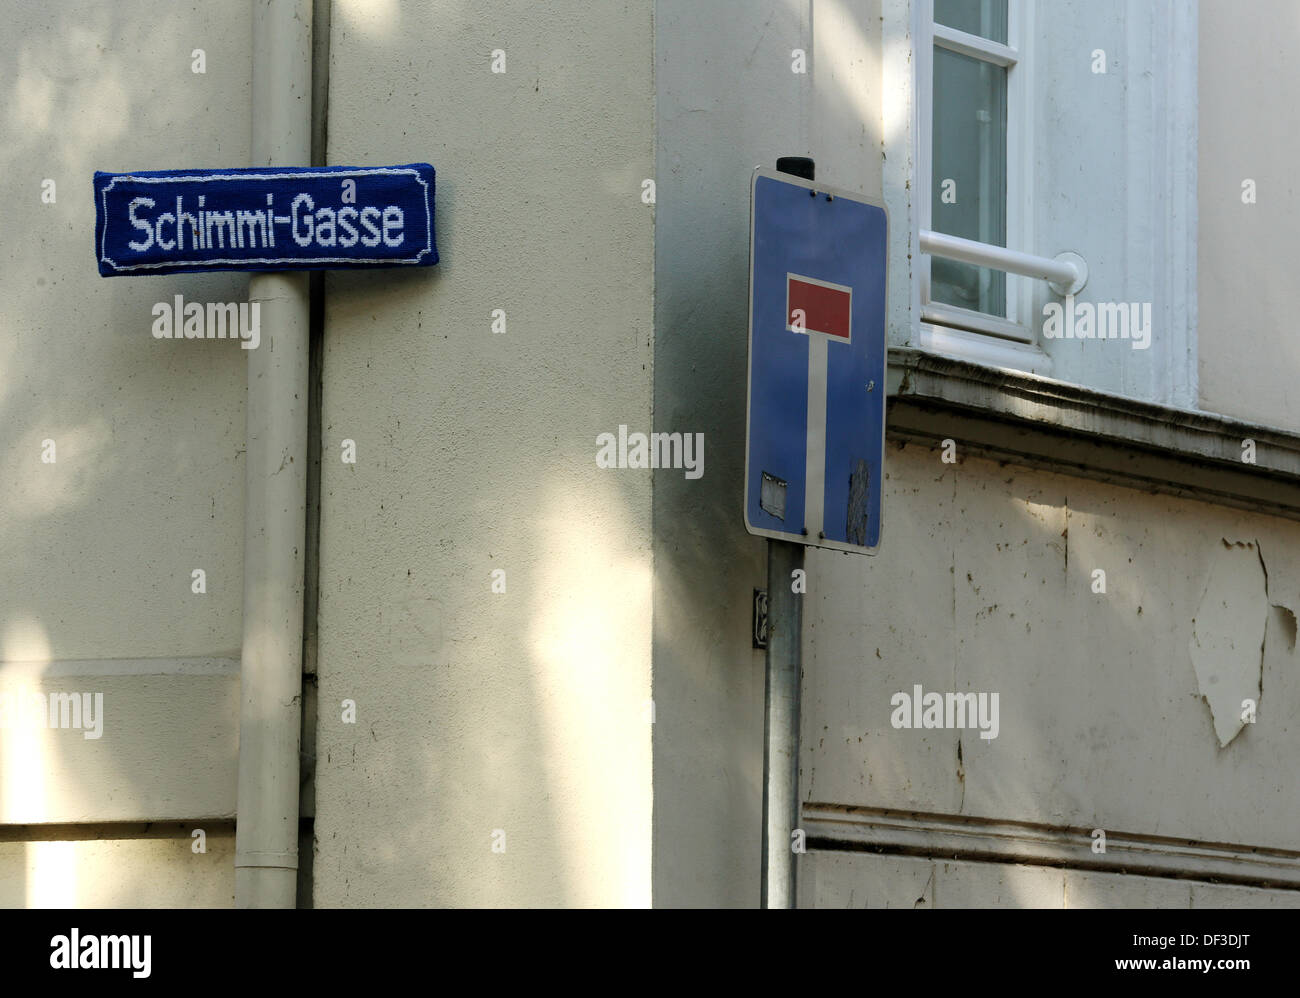 The knitted street sign 'Schimmi-Gasse' (Schimmi-Alley) hangs on the facade of a house in the district Ruhrort in Duisburg, Germany, 27 September 2013. The Ruhort knitting guerilla and Du Tours want to honor commissioner Horst Schimanski - a fictive figure of the ARD television crime series Tatort. Photo: ROLAND WEIHRAUCH Stock Photo